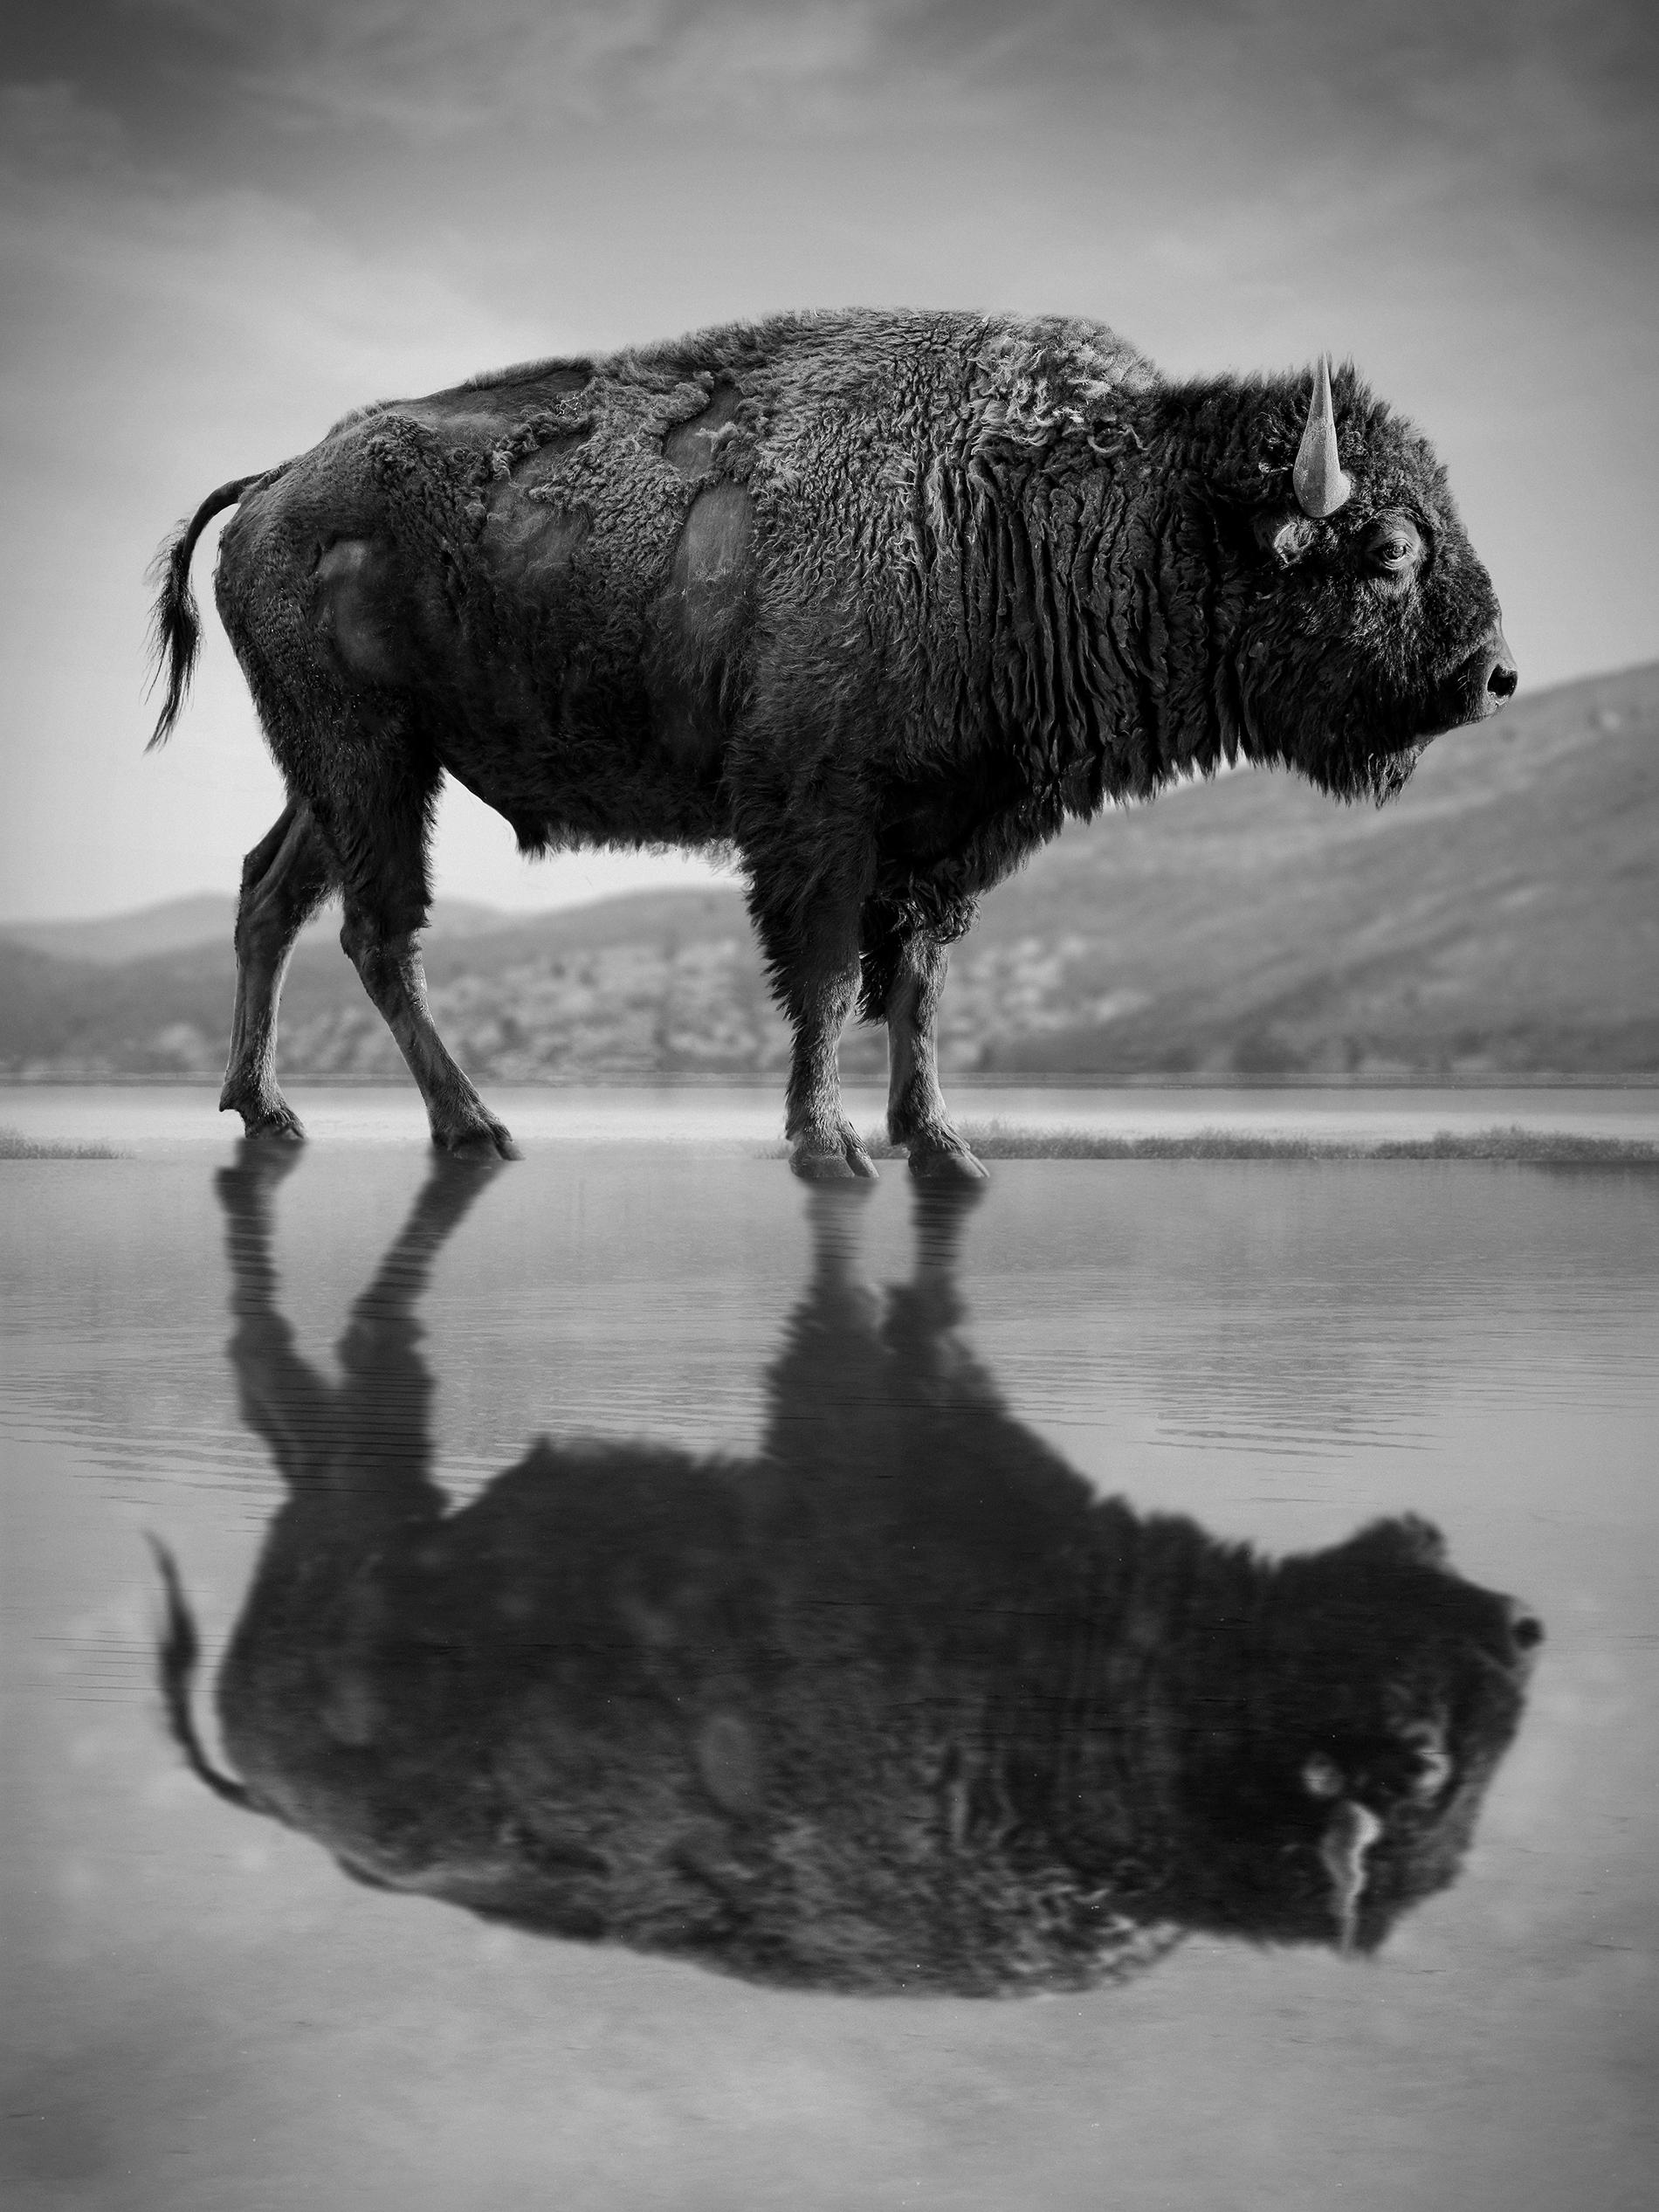 Shane Russeck Black and White Photograph - "Old World" 48x36 Black & White Photography Bison  Buffalo Unsigned Photograph